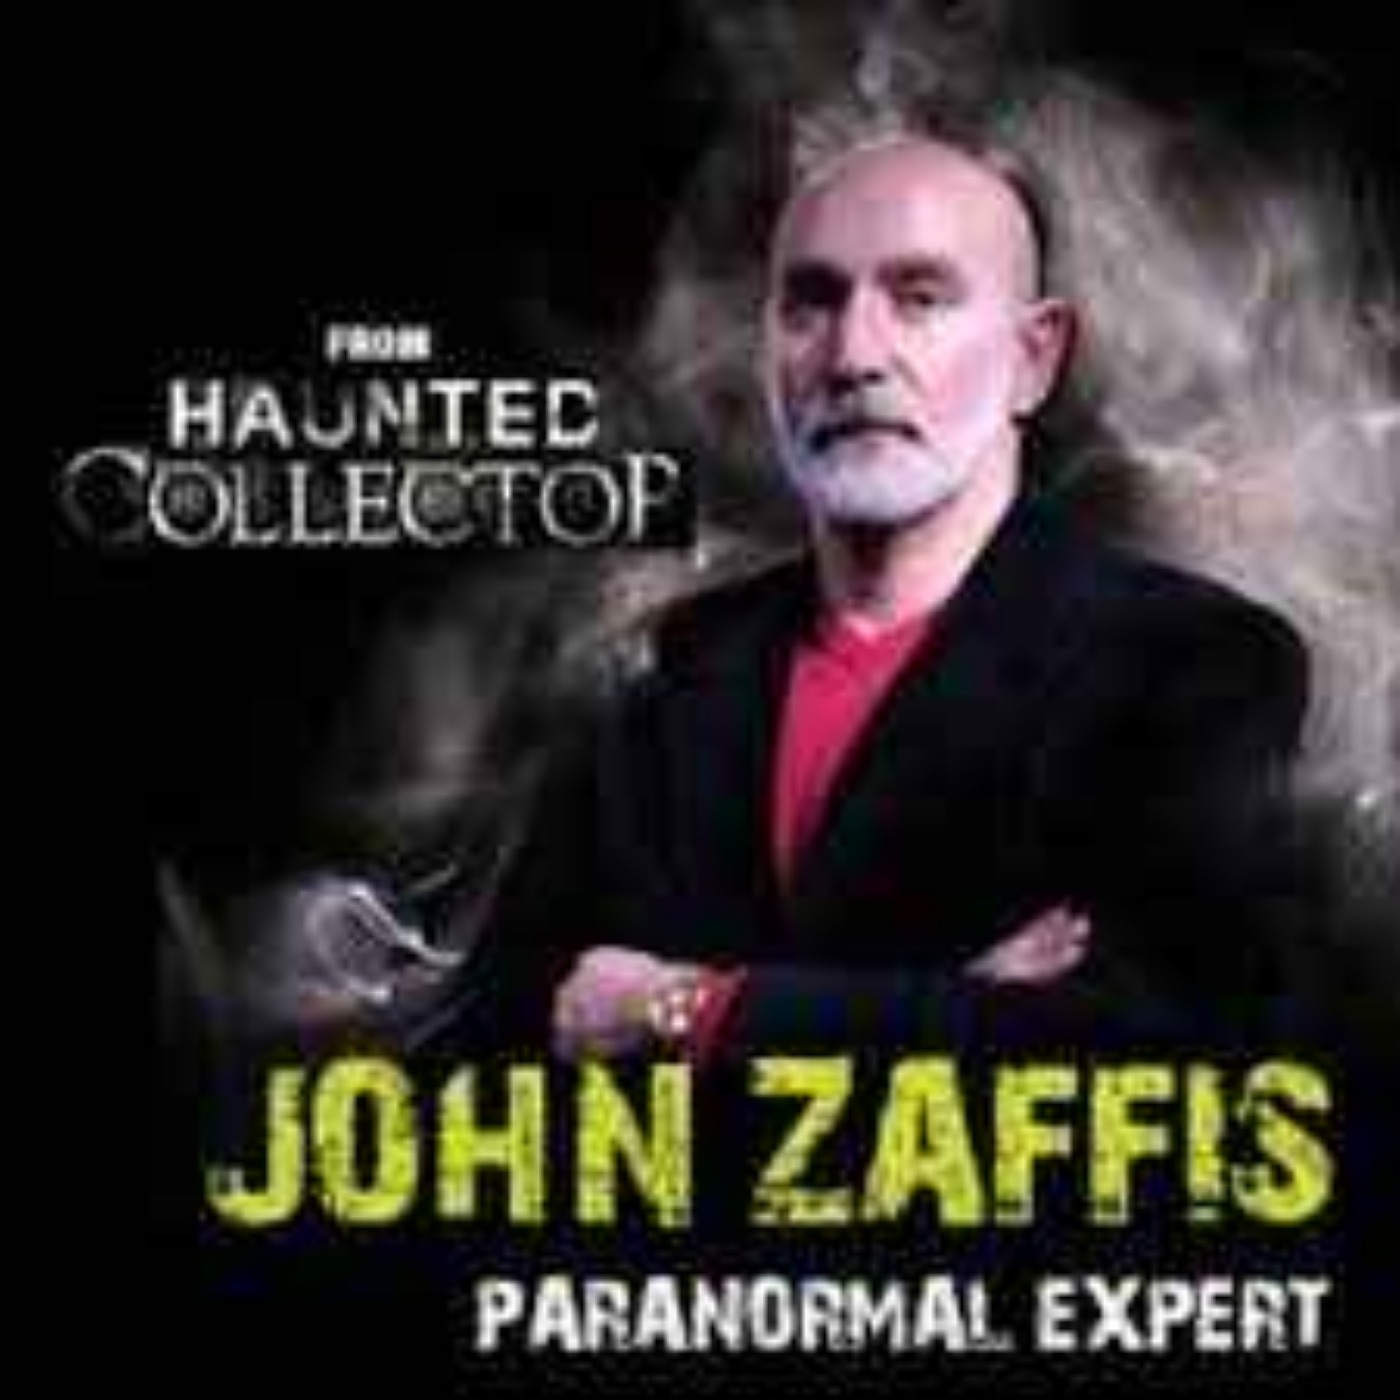 JOHNNY ZAFFIS - HAUNTED COLLECTOR